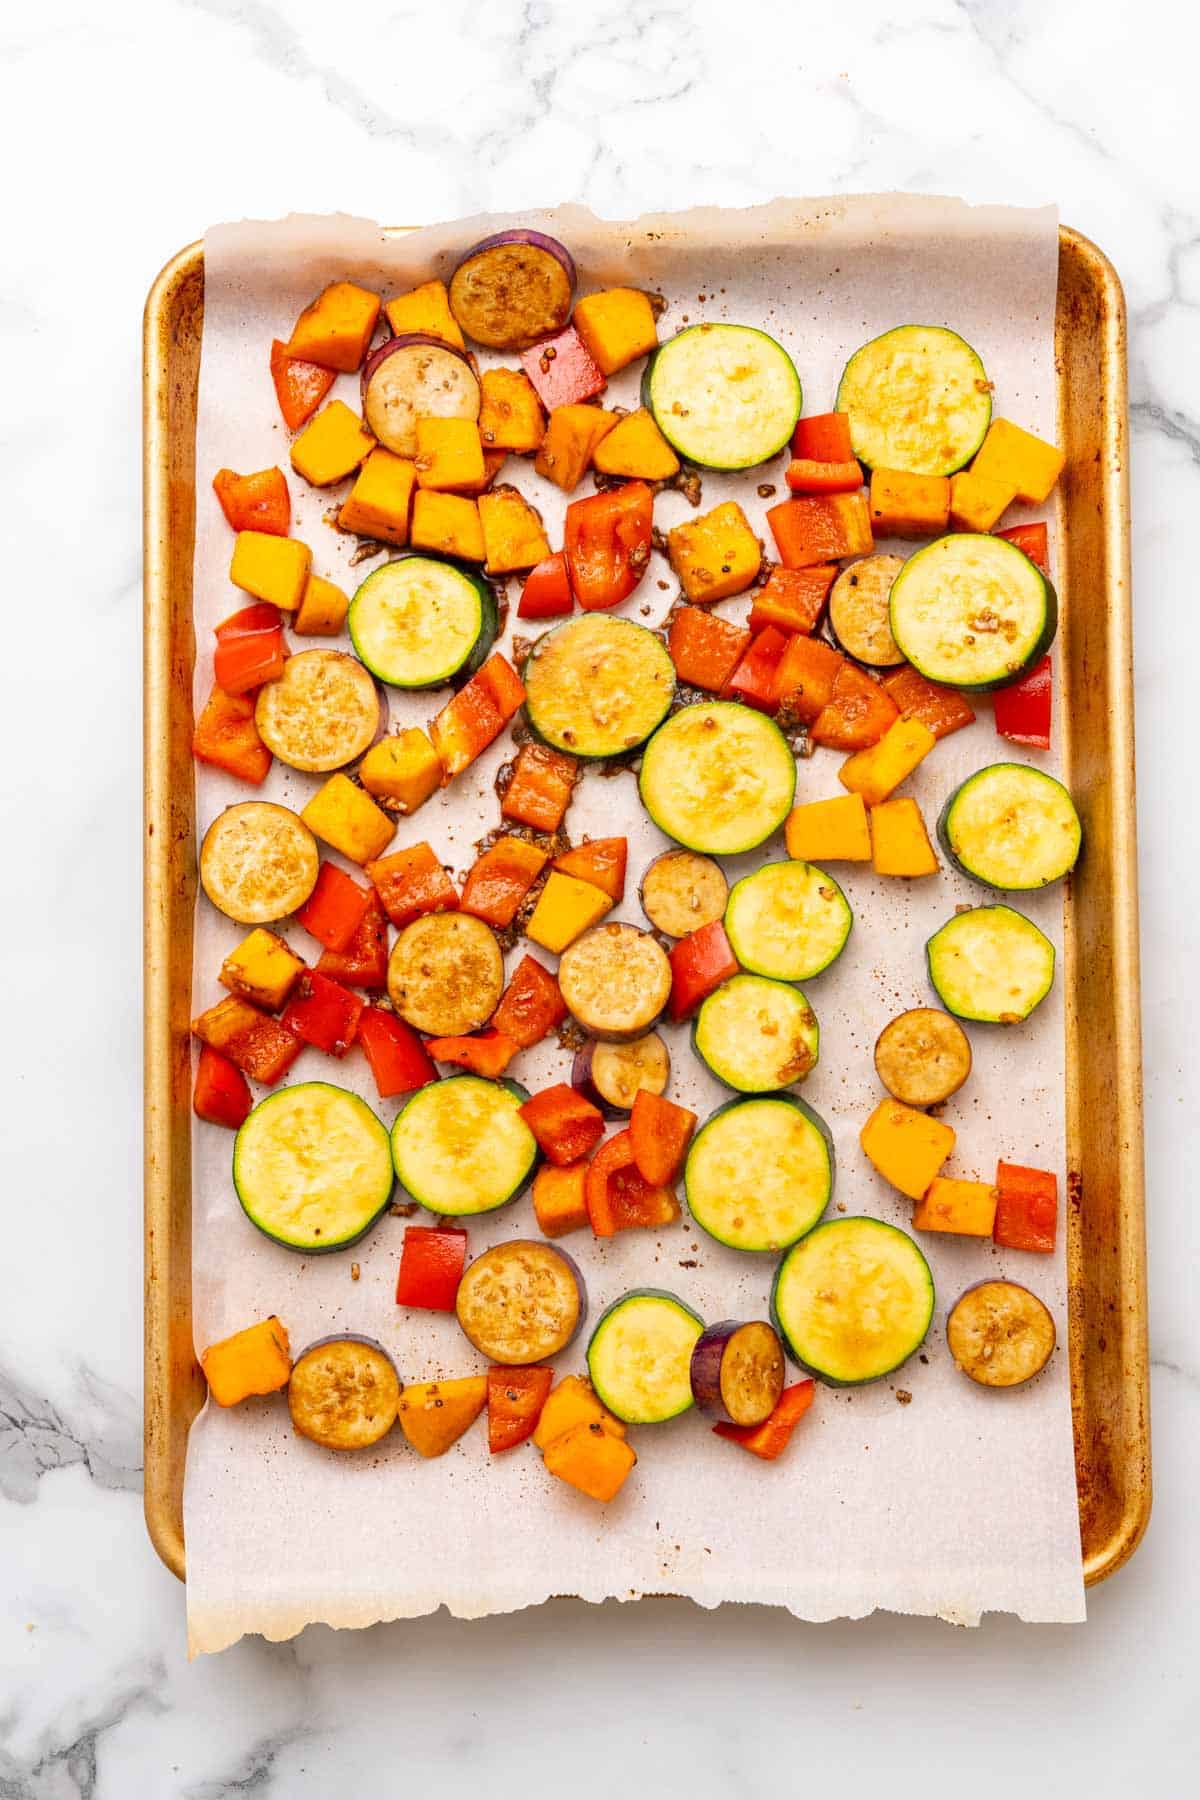 Veggies slightly roasted on a baking tray lined with parchment paper, as seen from above on a white marble countertop